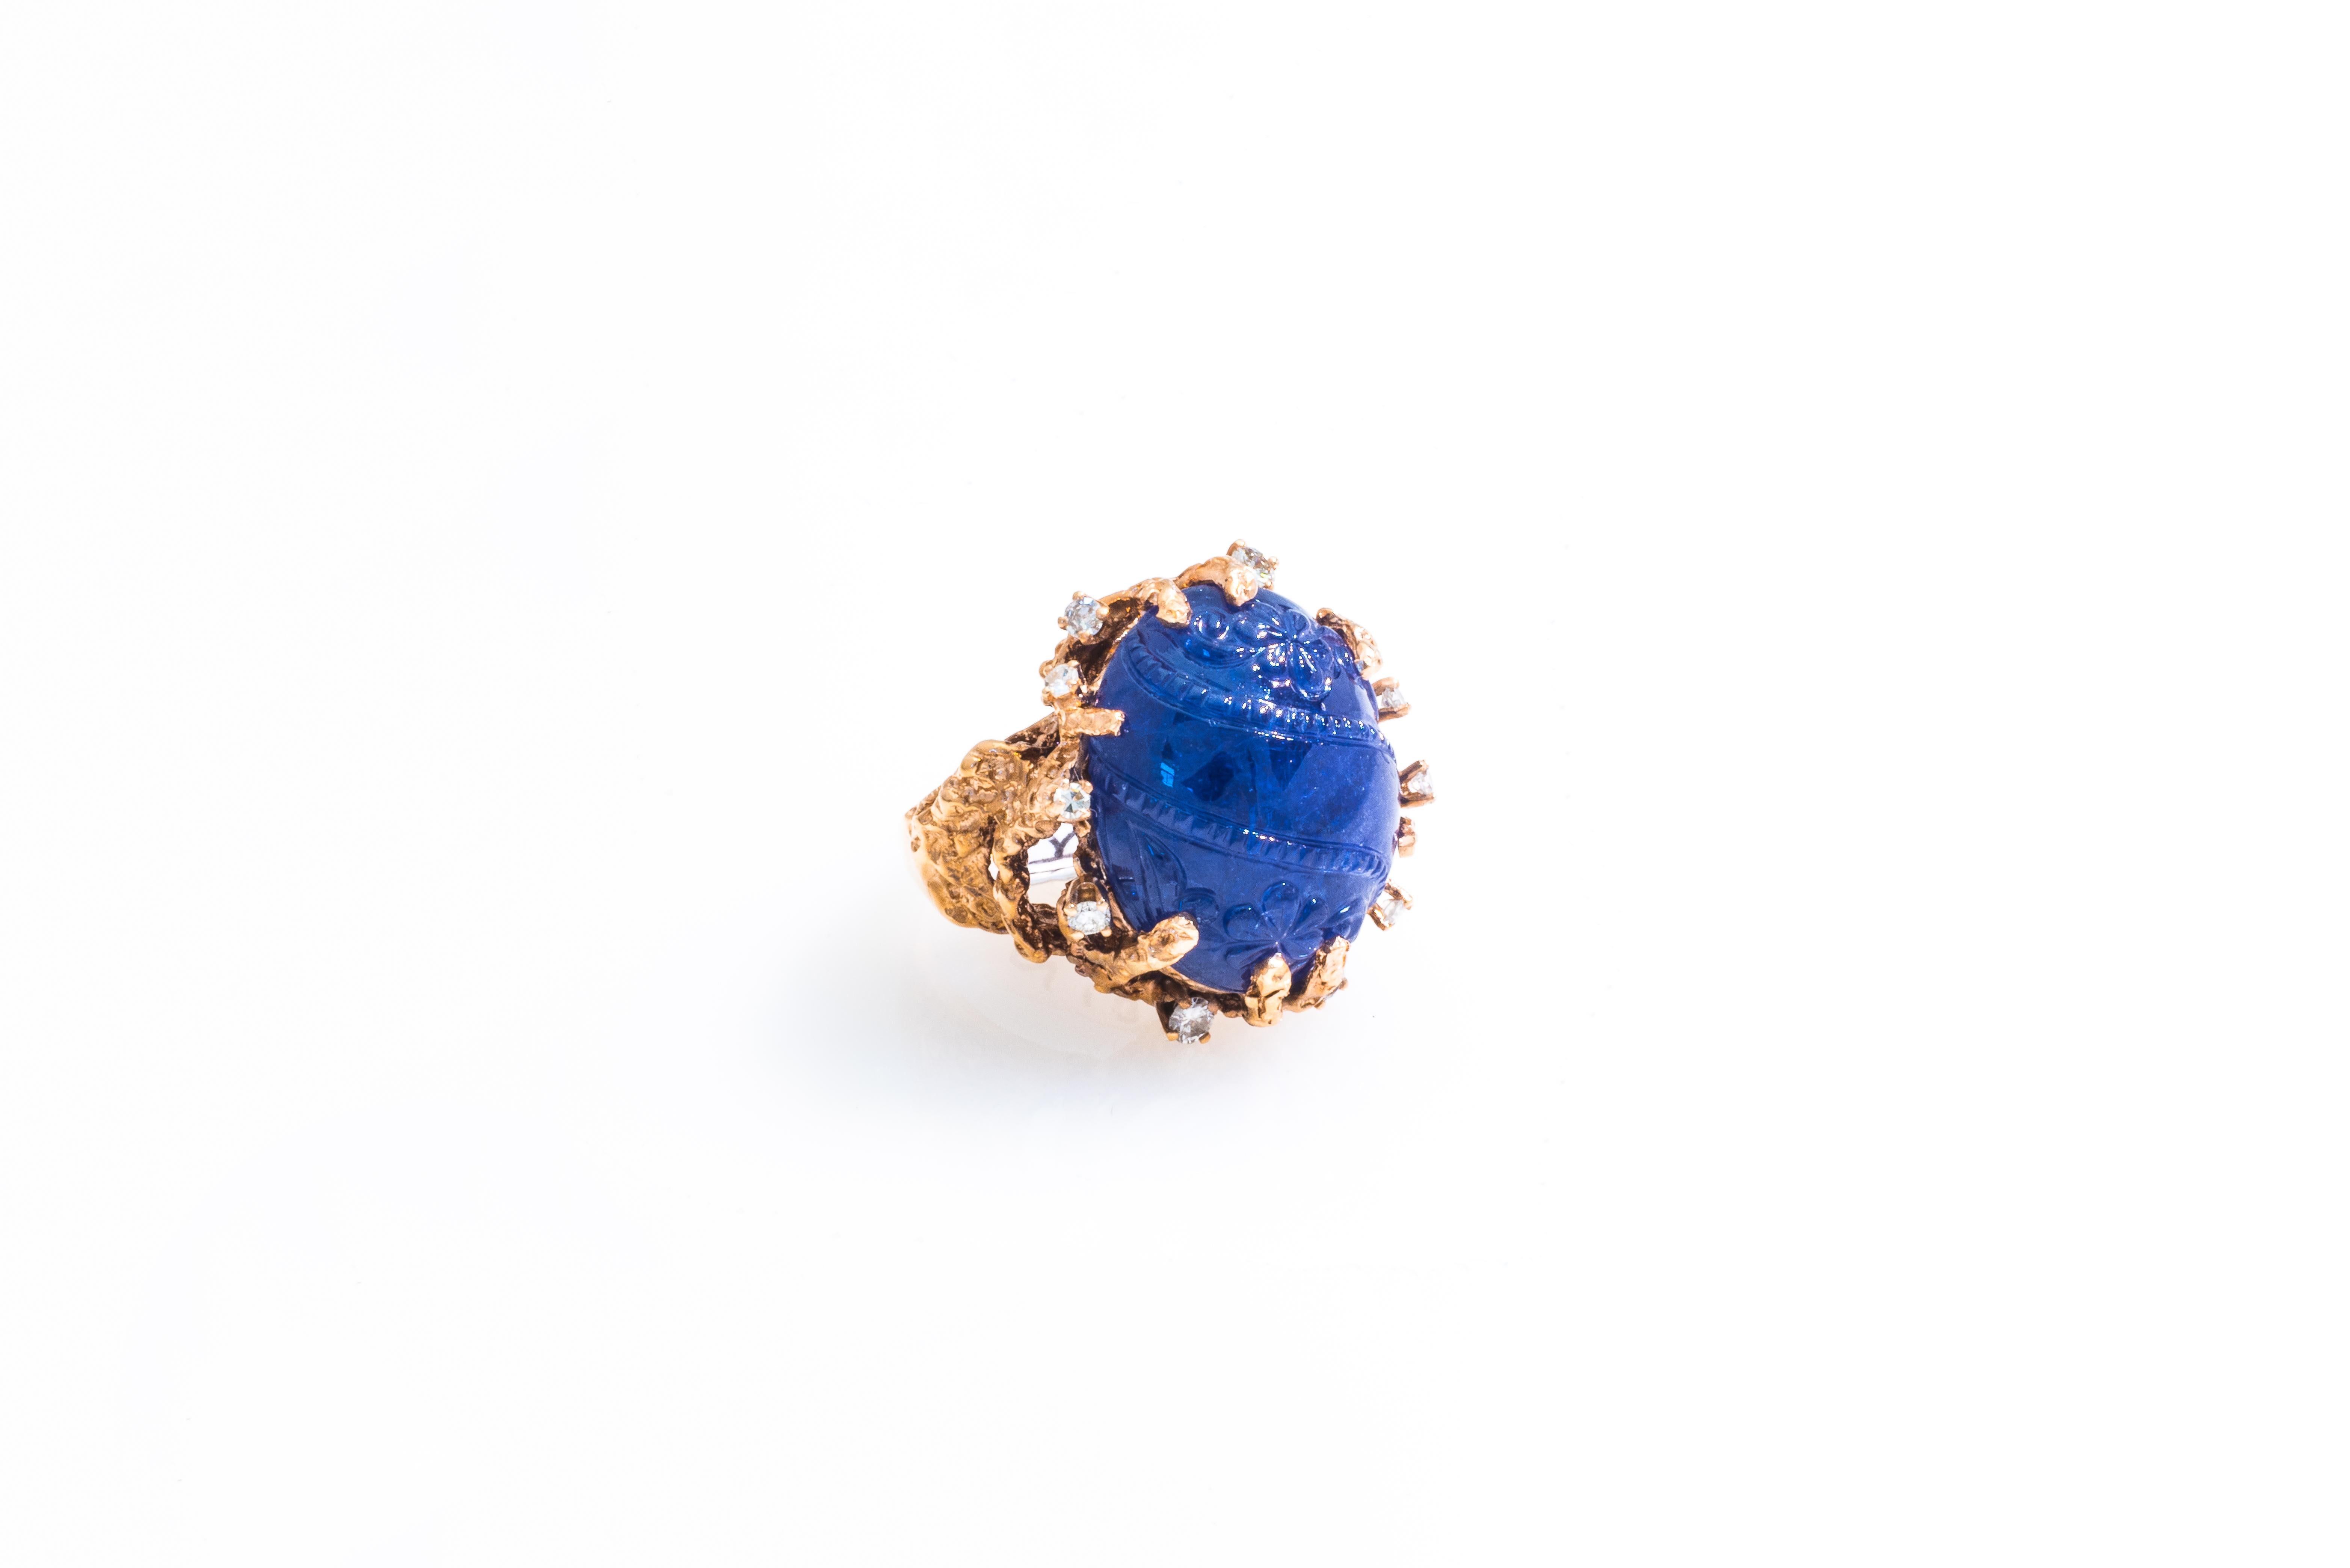 An extraordinary handmade 14K pink/rose gold ring mounted with a stunning 34.72 CT, GIA certified, oval carved Cabochon tanzanite at its center, GIA report Number: 1152207665. This magnificent gem, measuring 21.70 x 17.90 x 11.00 mm, boasts a